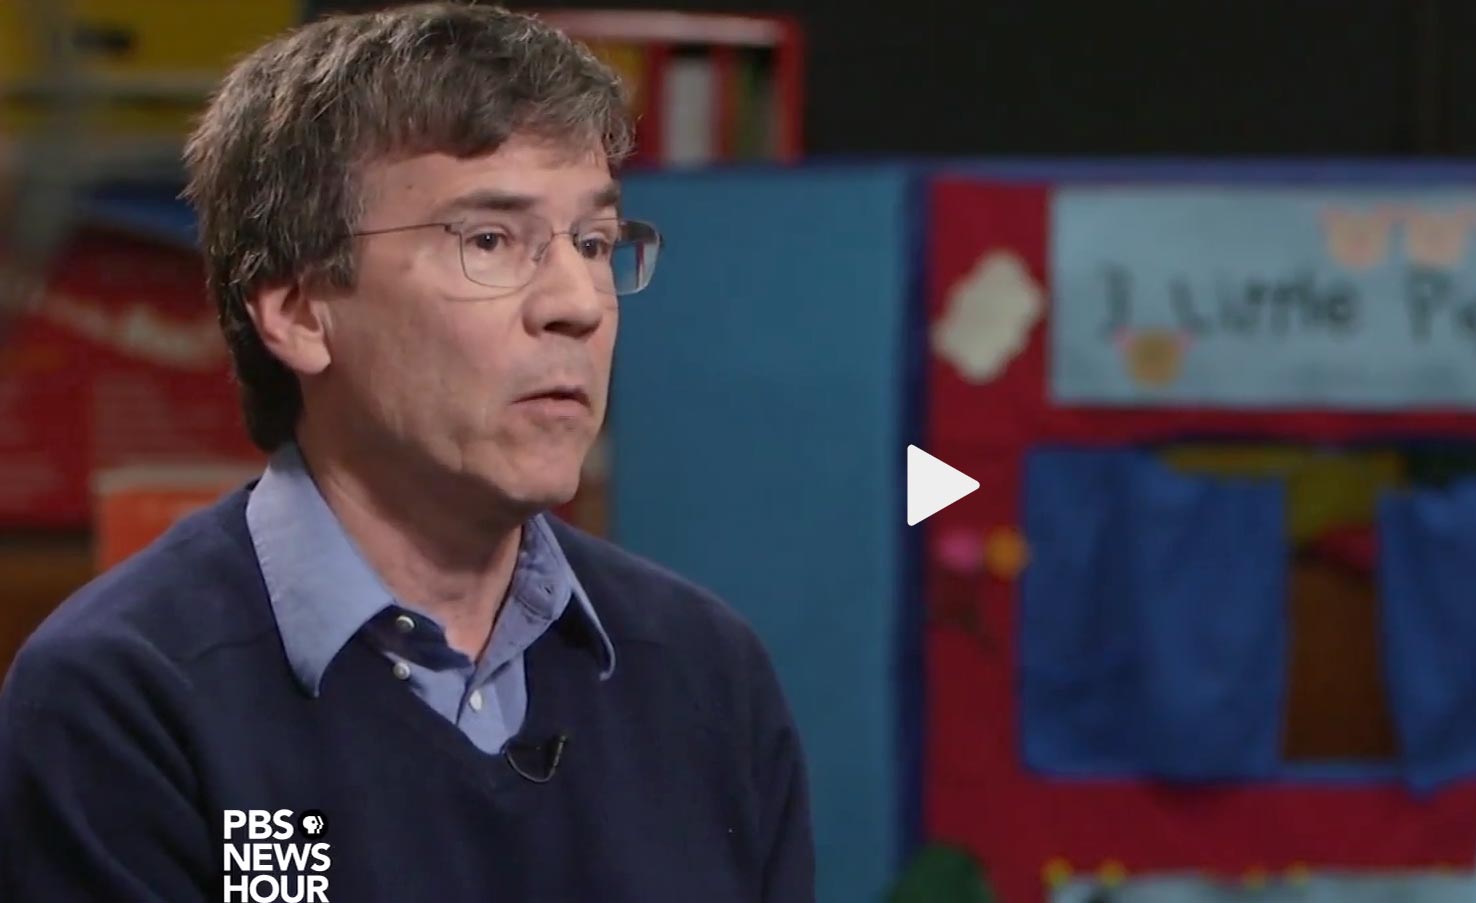 Bill Gormley appears on PBS News Hour. “Seeing success, conservative Oklahoma banks on universal preschool”